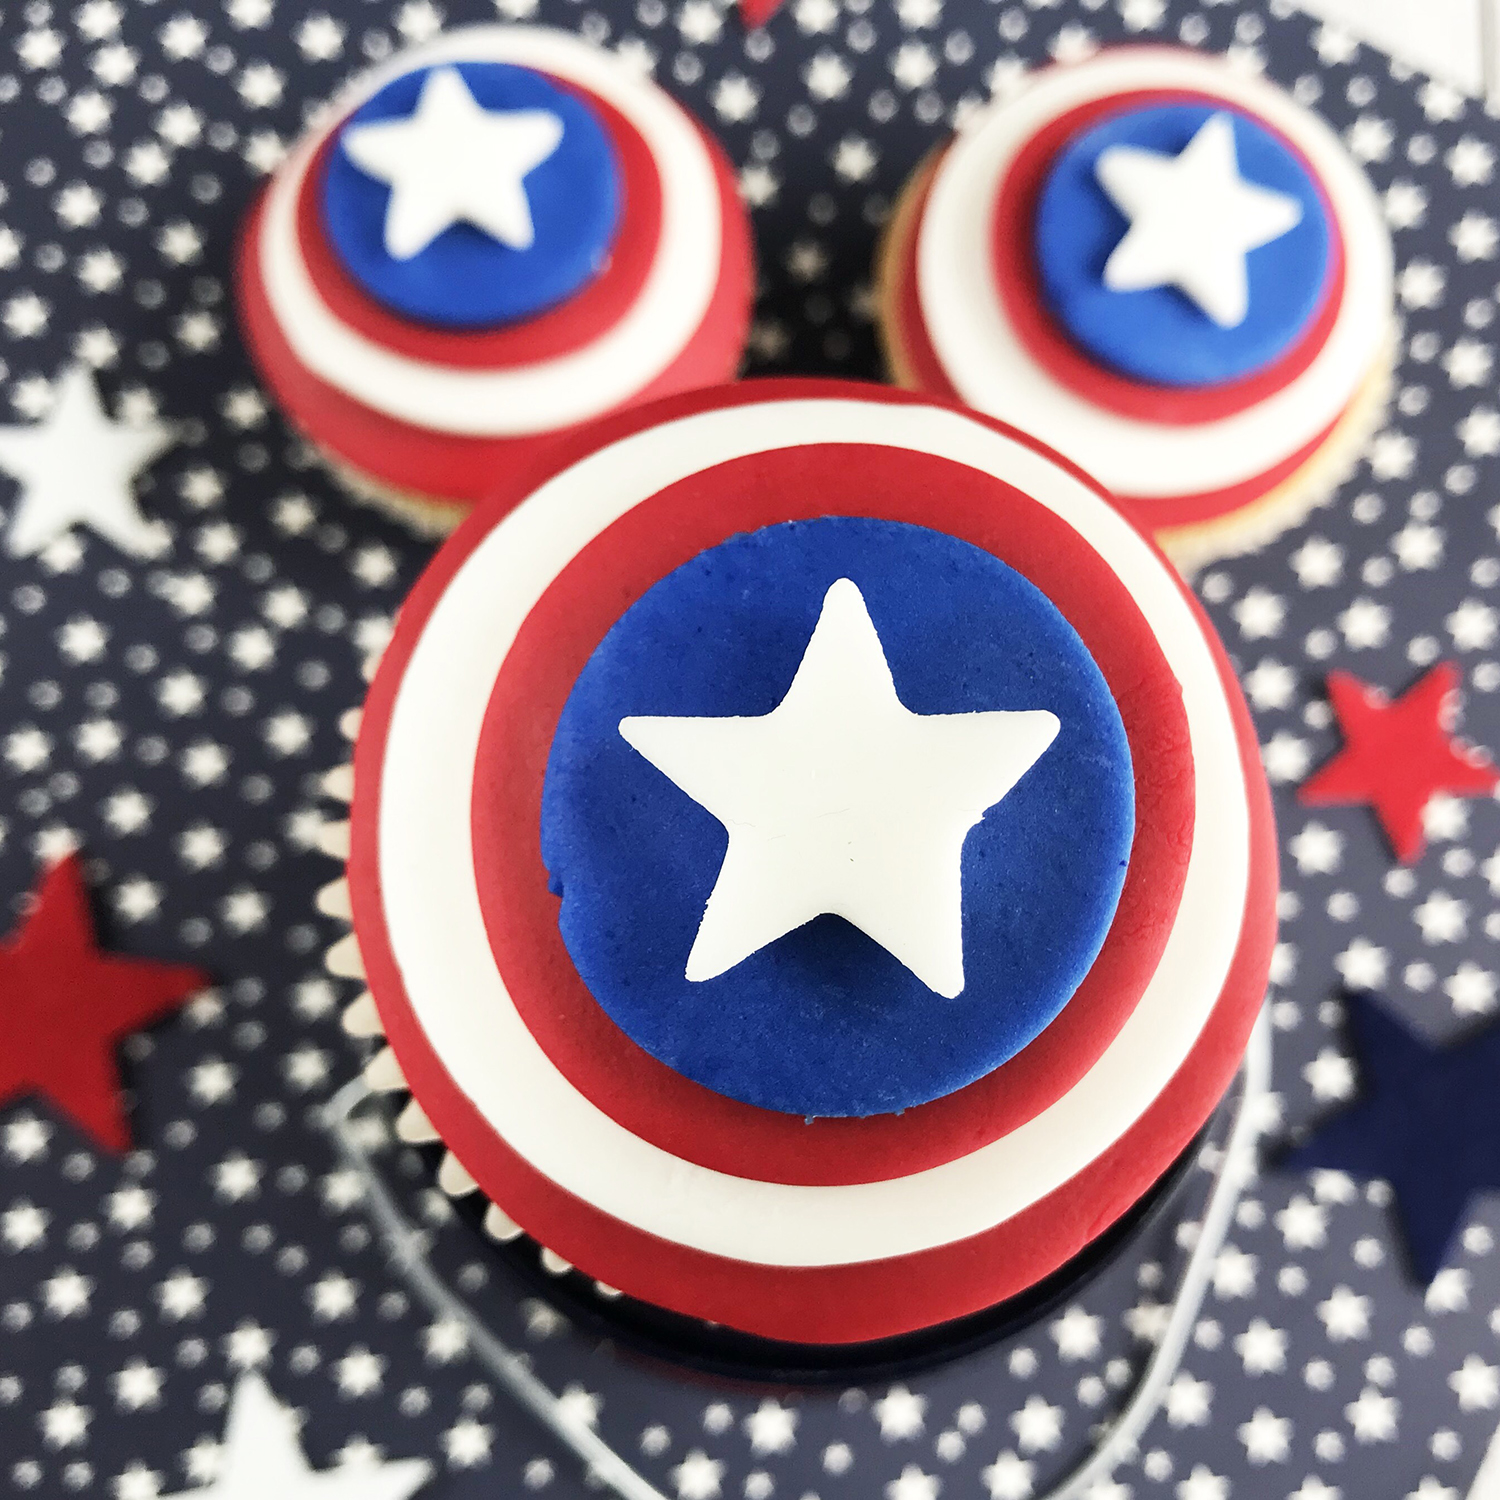 The Avengers printed topper cake